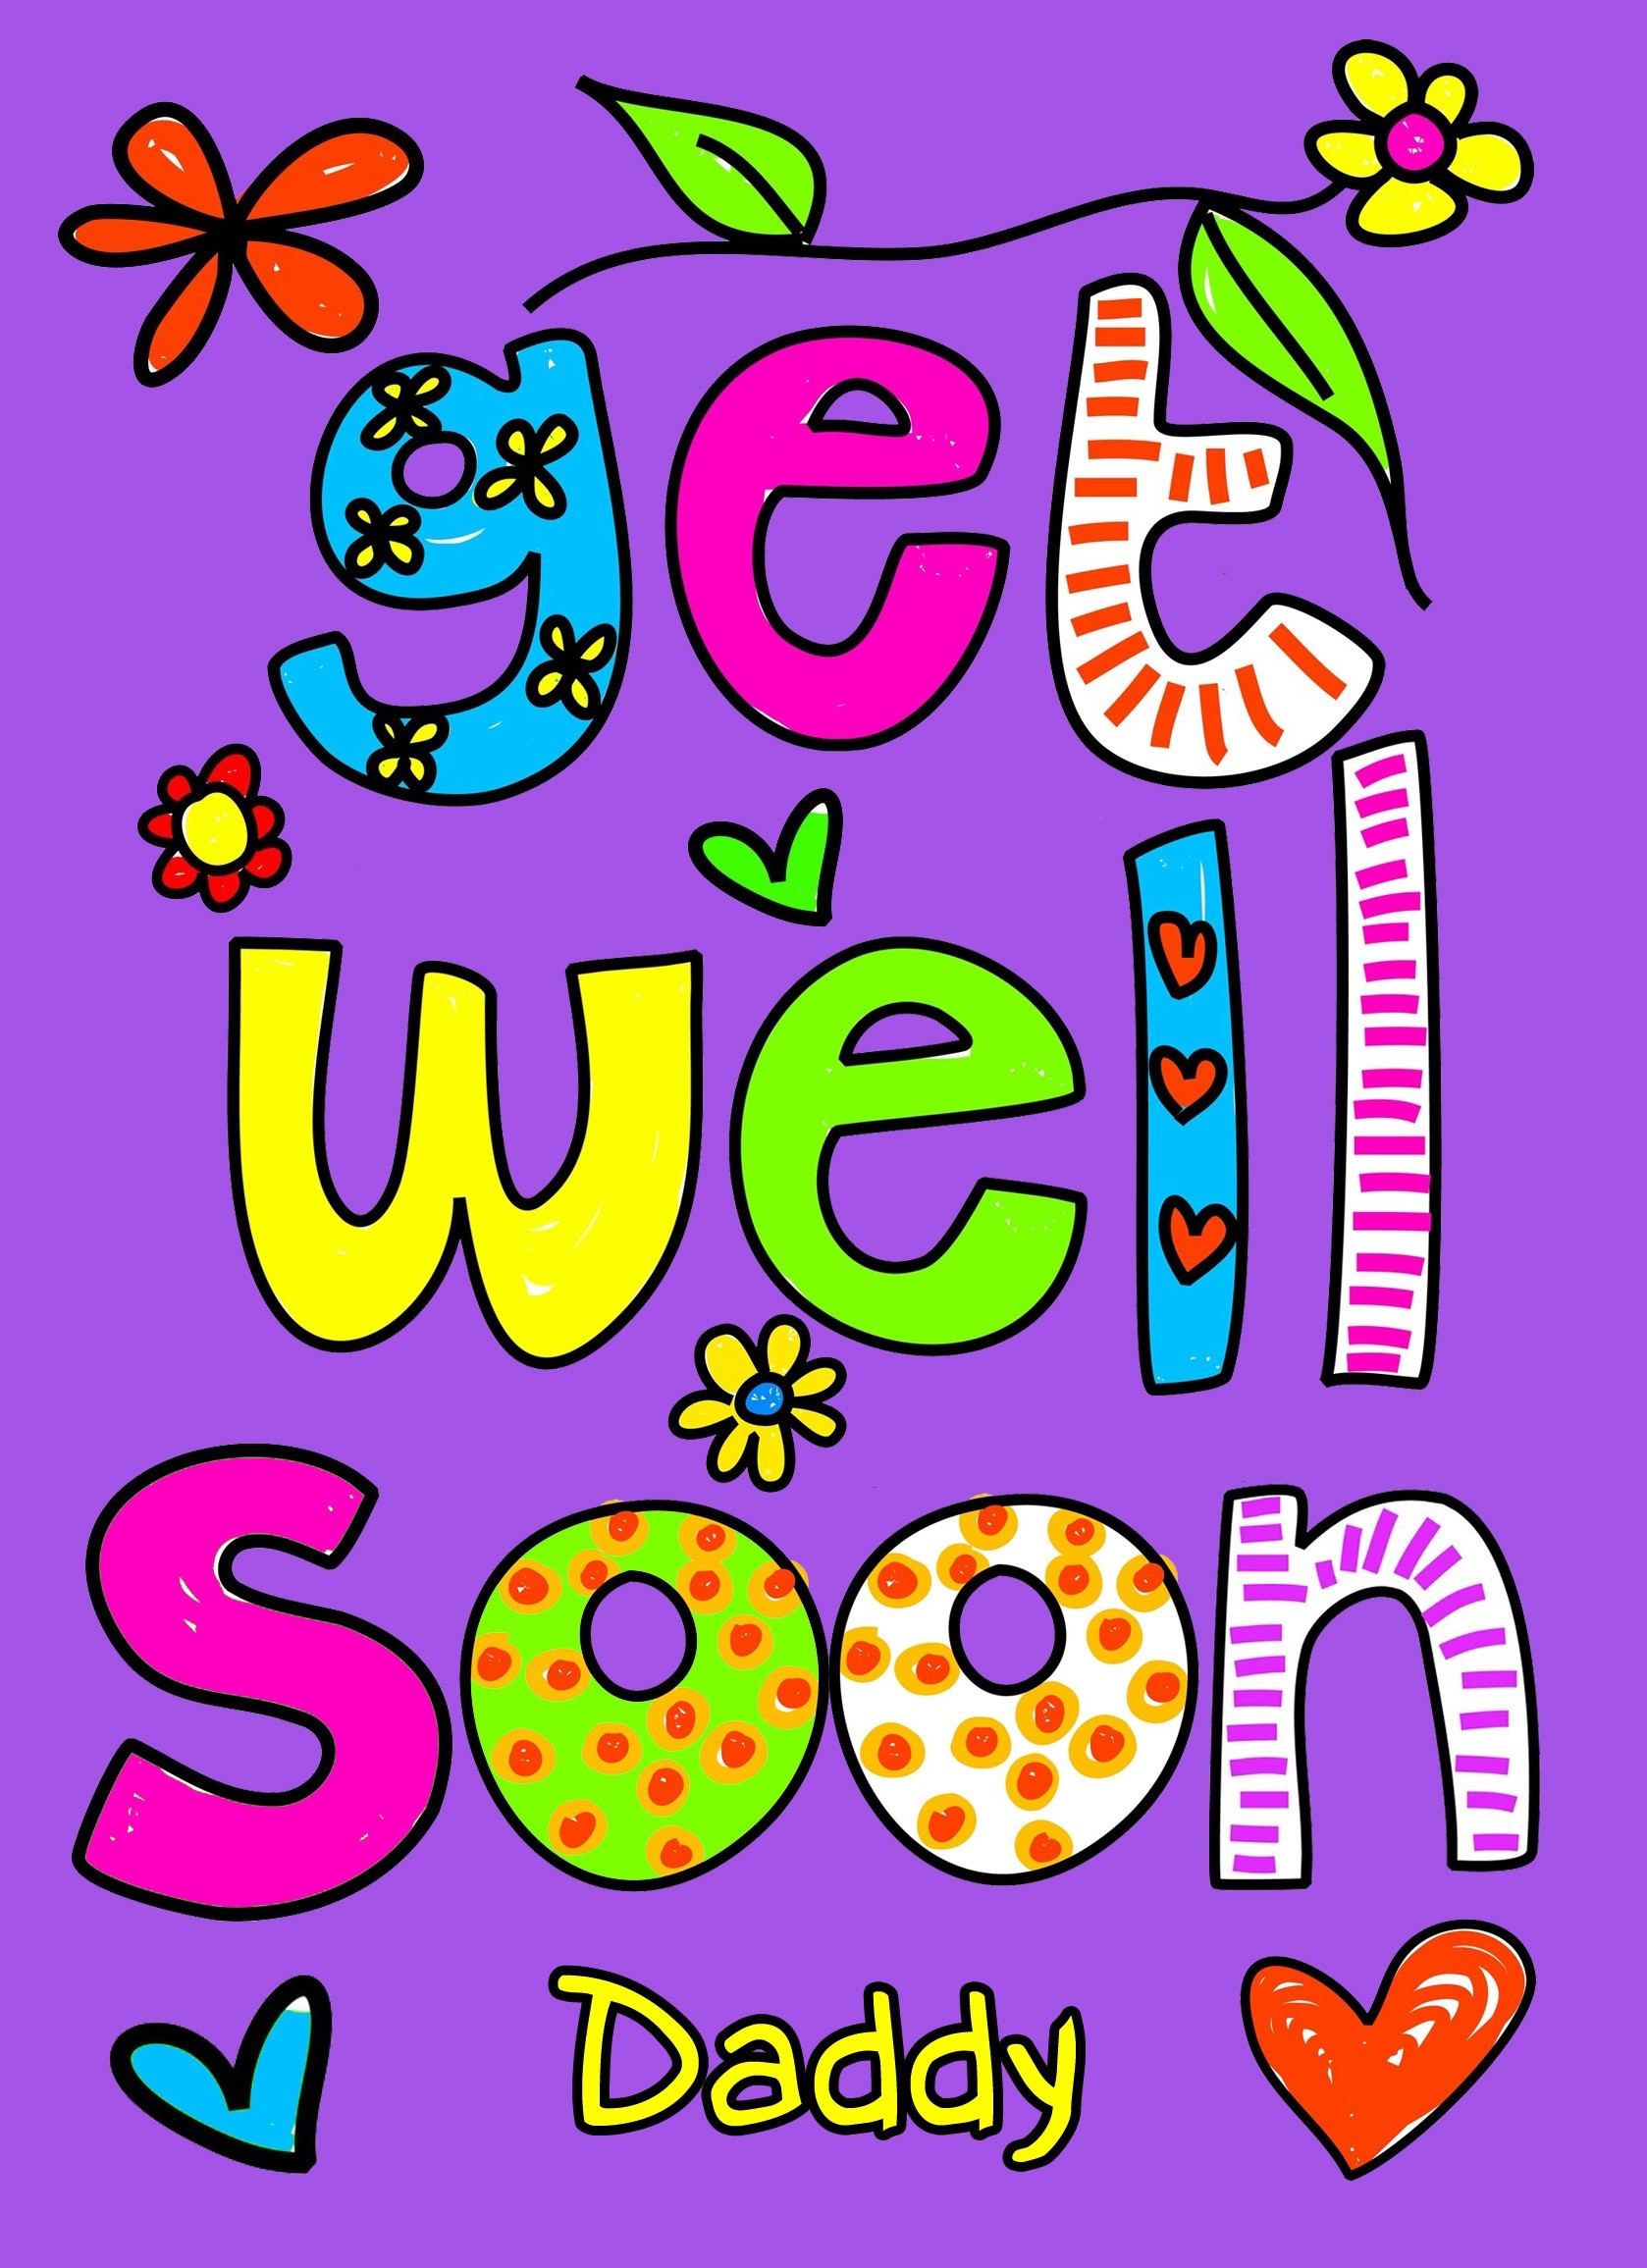 Get Well Soon 'Daddy' Greeting Card